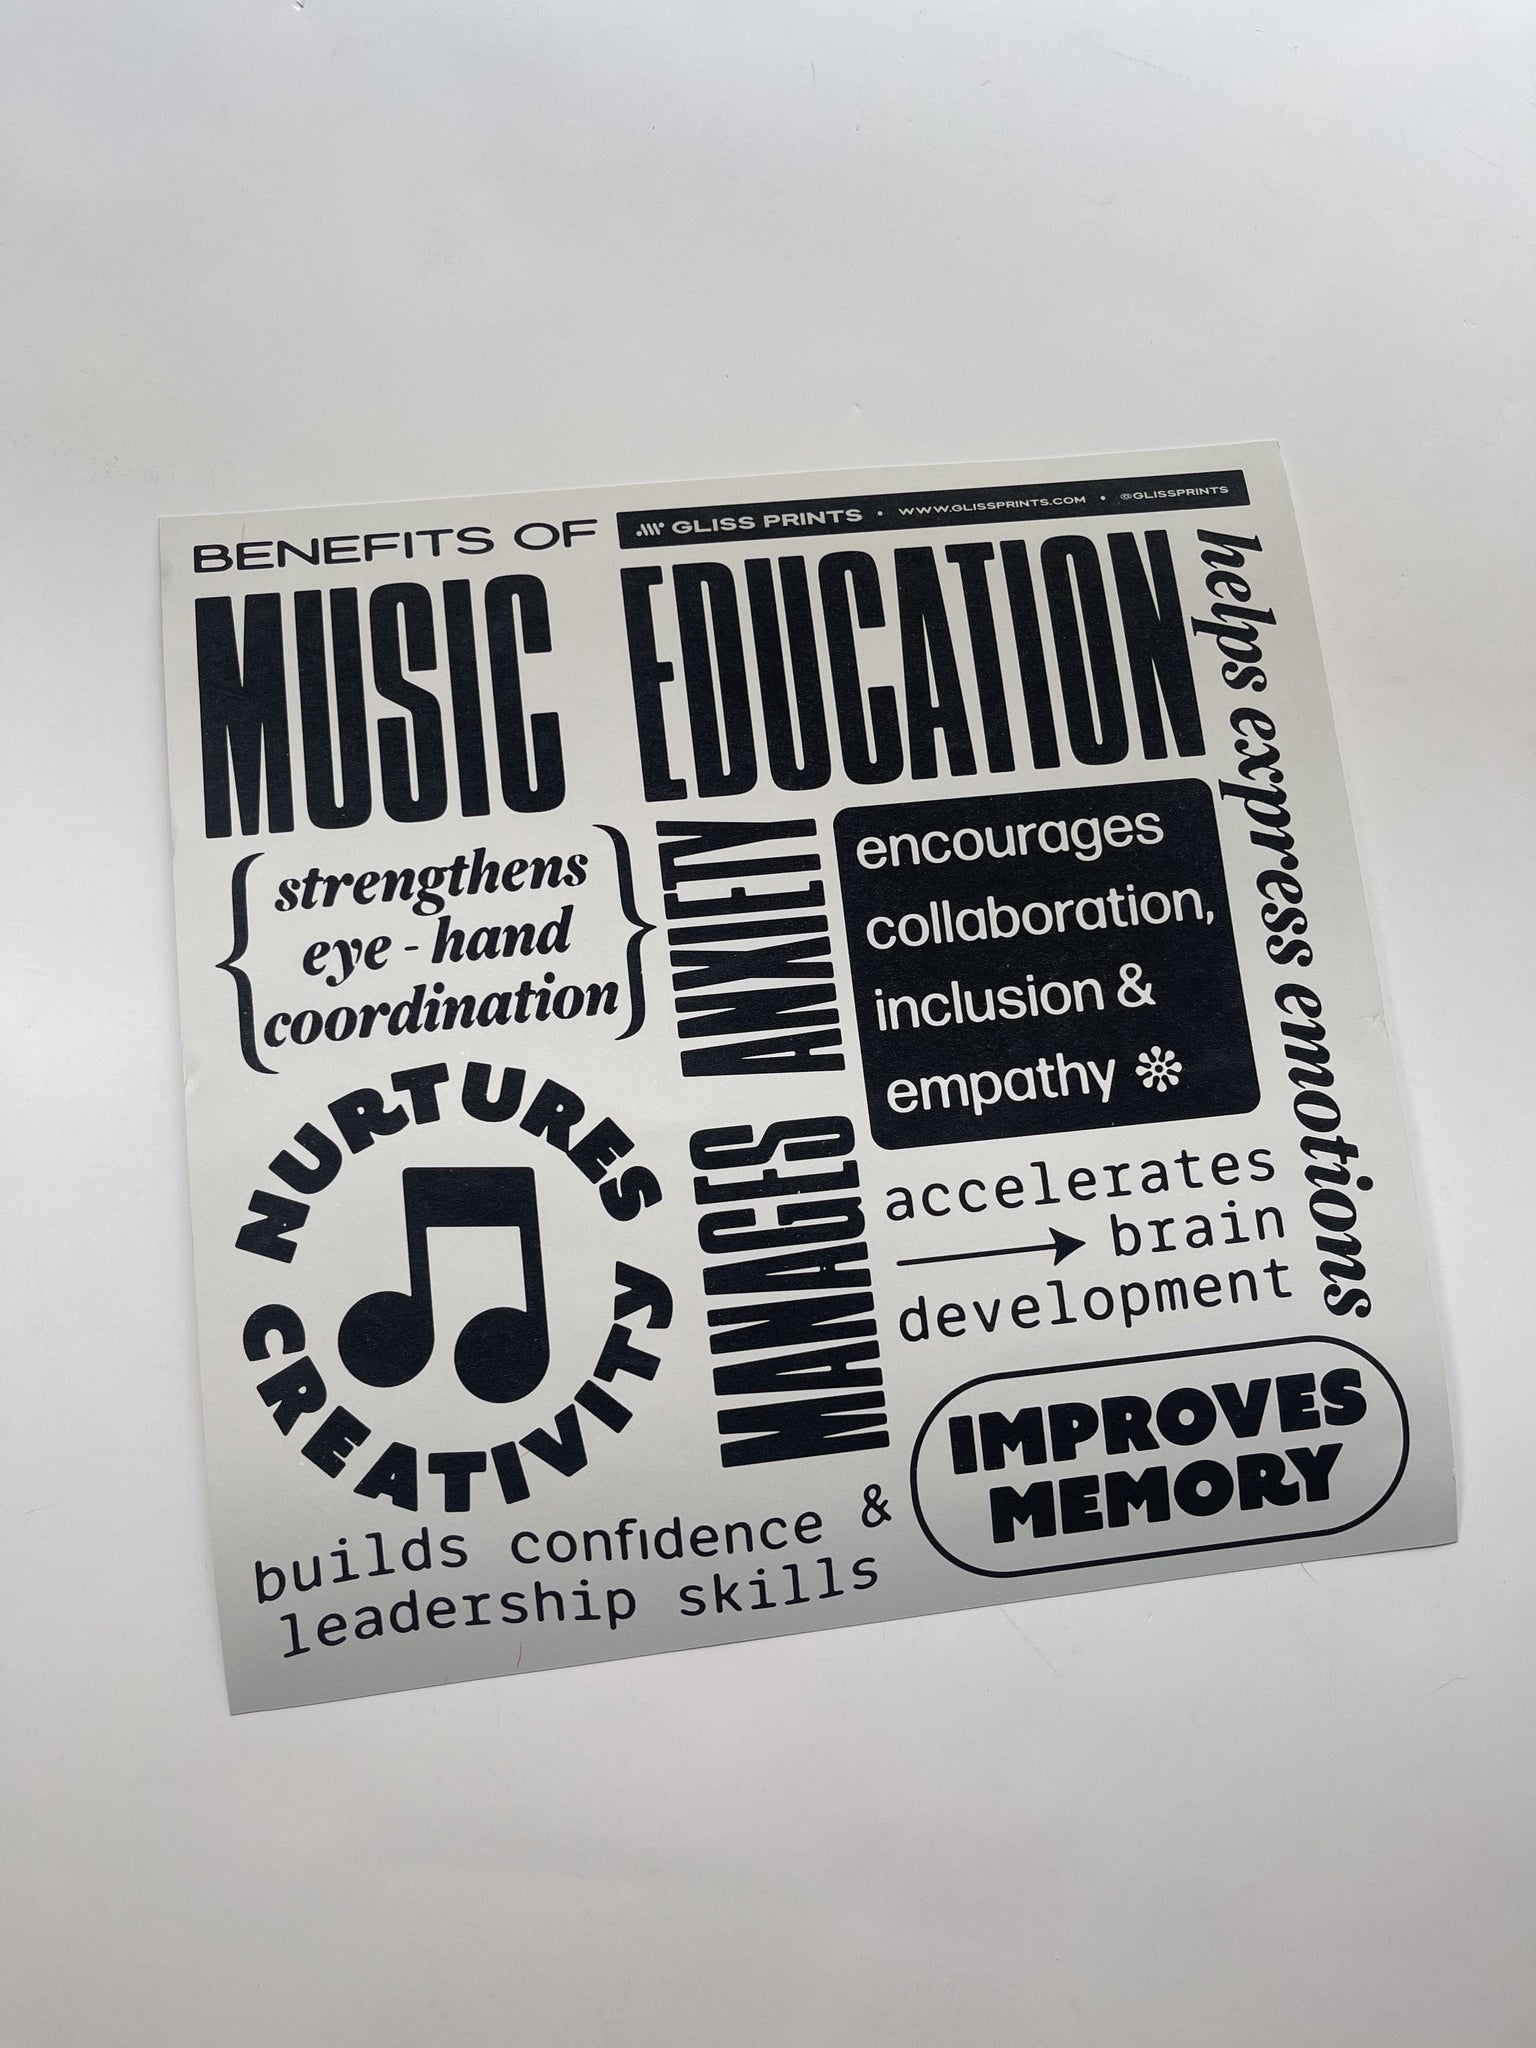 SAMPLE: Benefits of Music Education 12x12